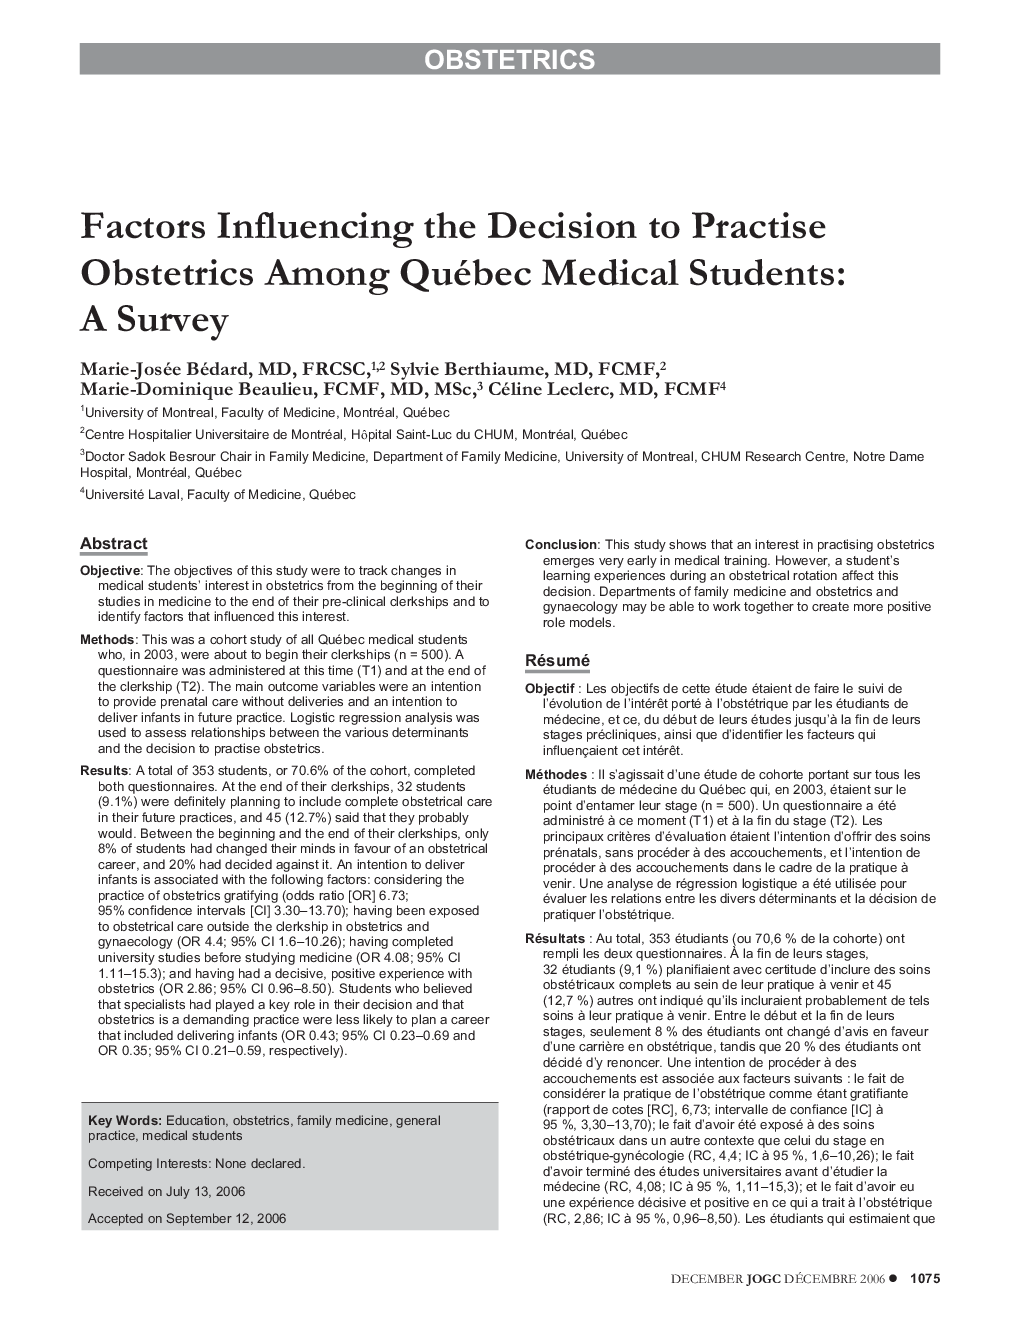 Factors Influencing the Decision to Practise Obstetrics Among Québec Medical Students: A Survey